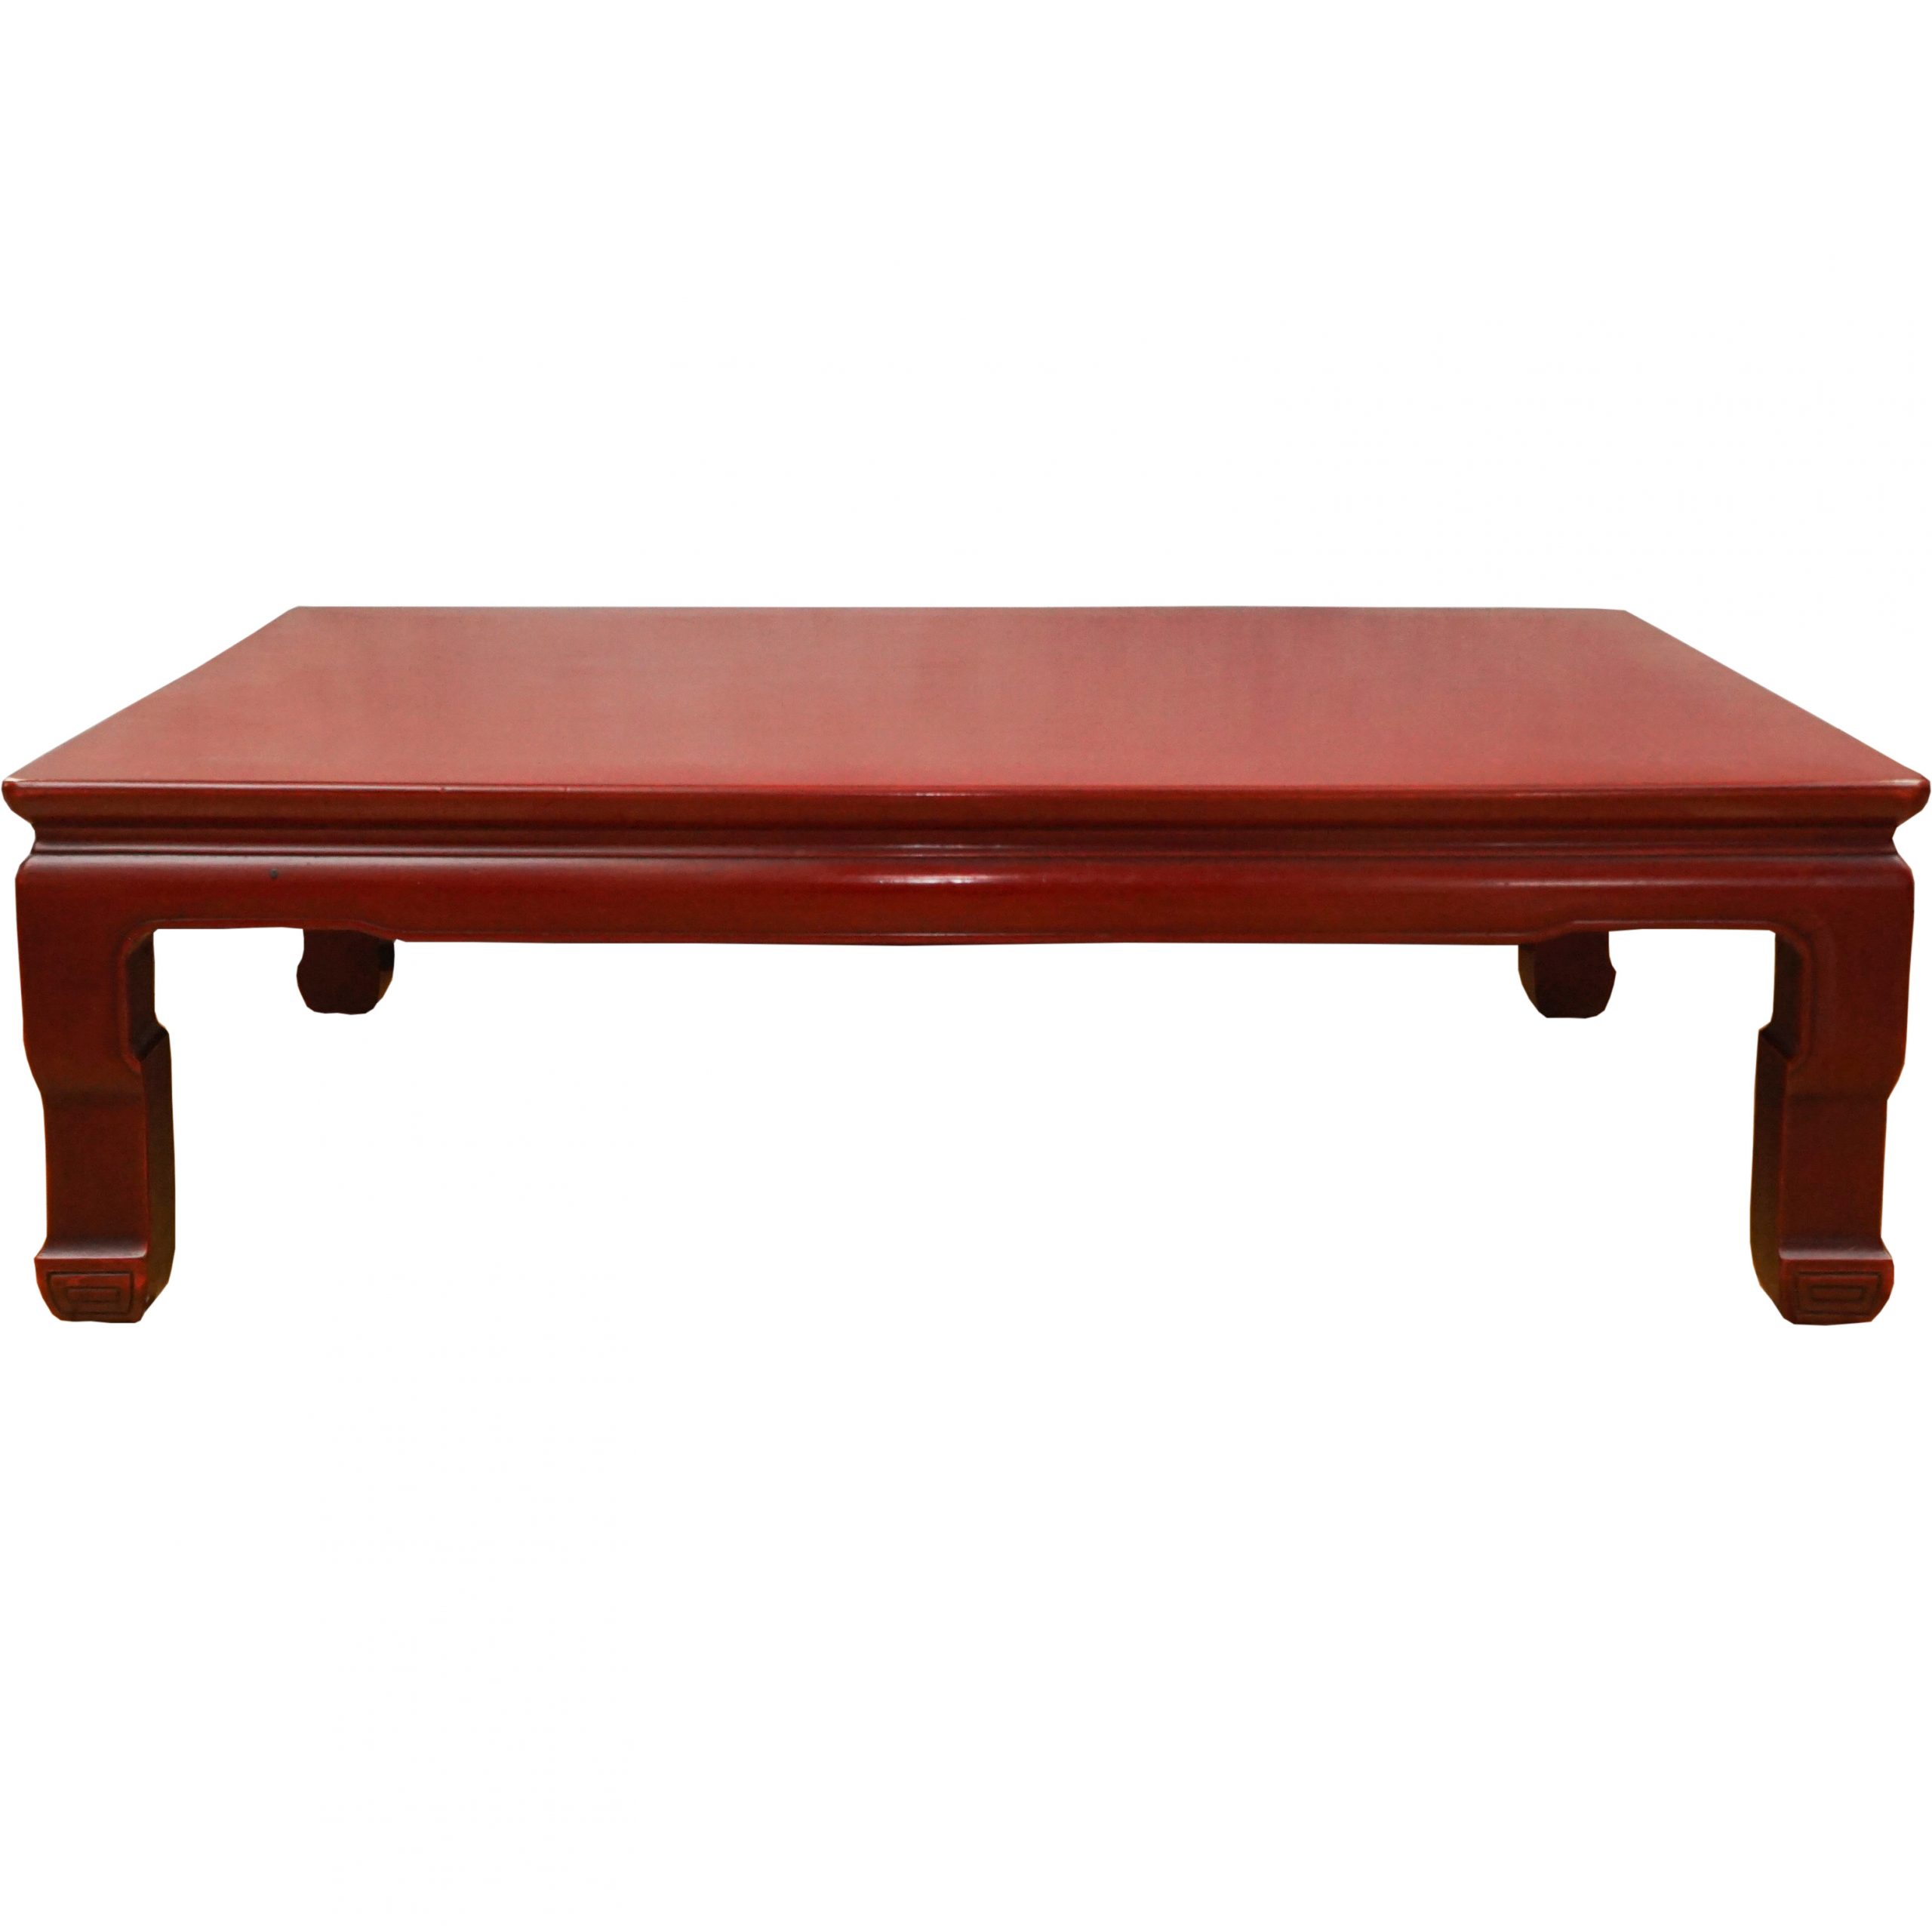 Red Lacquer Table